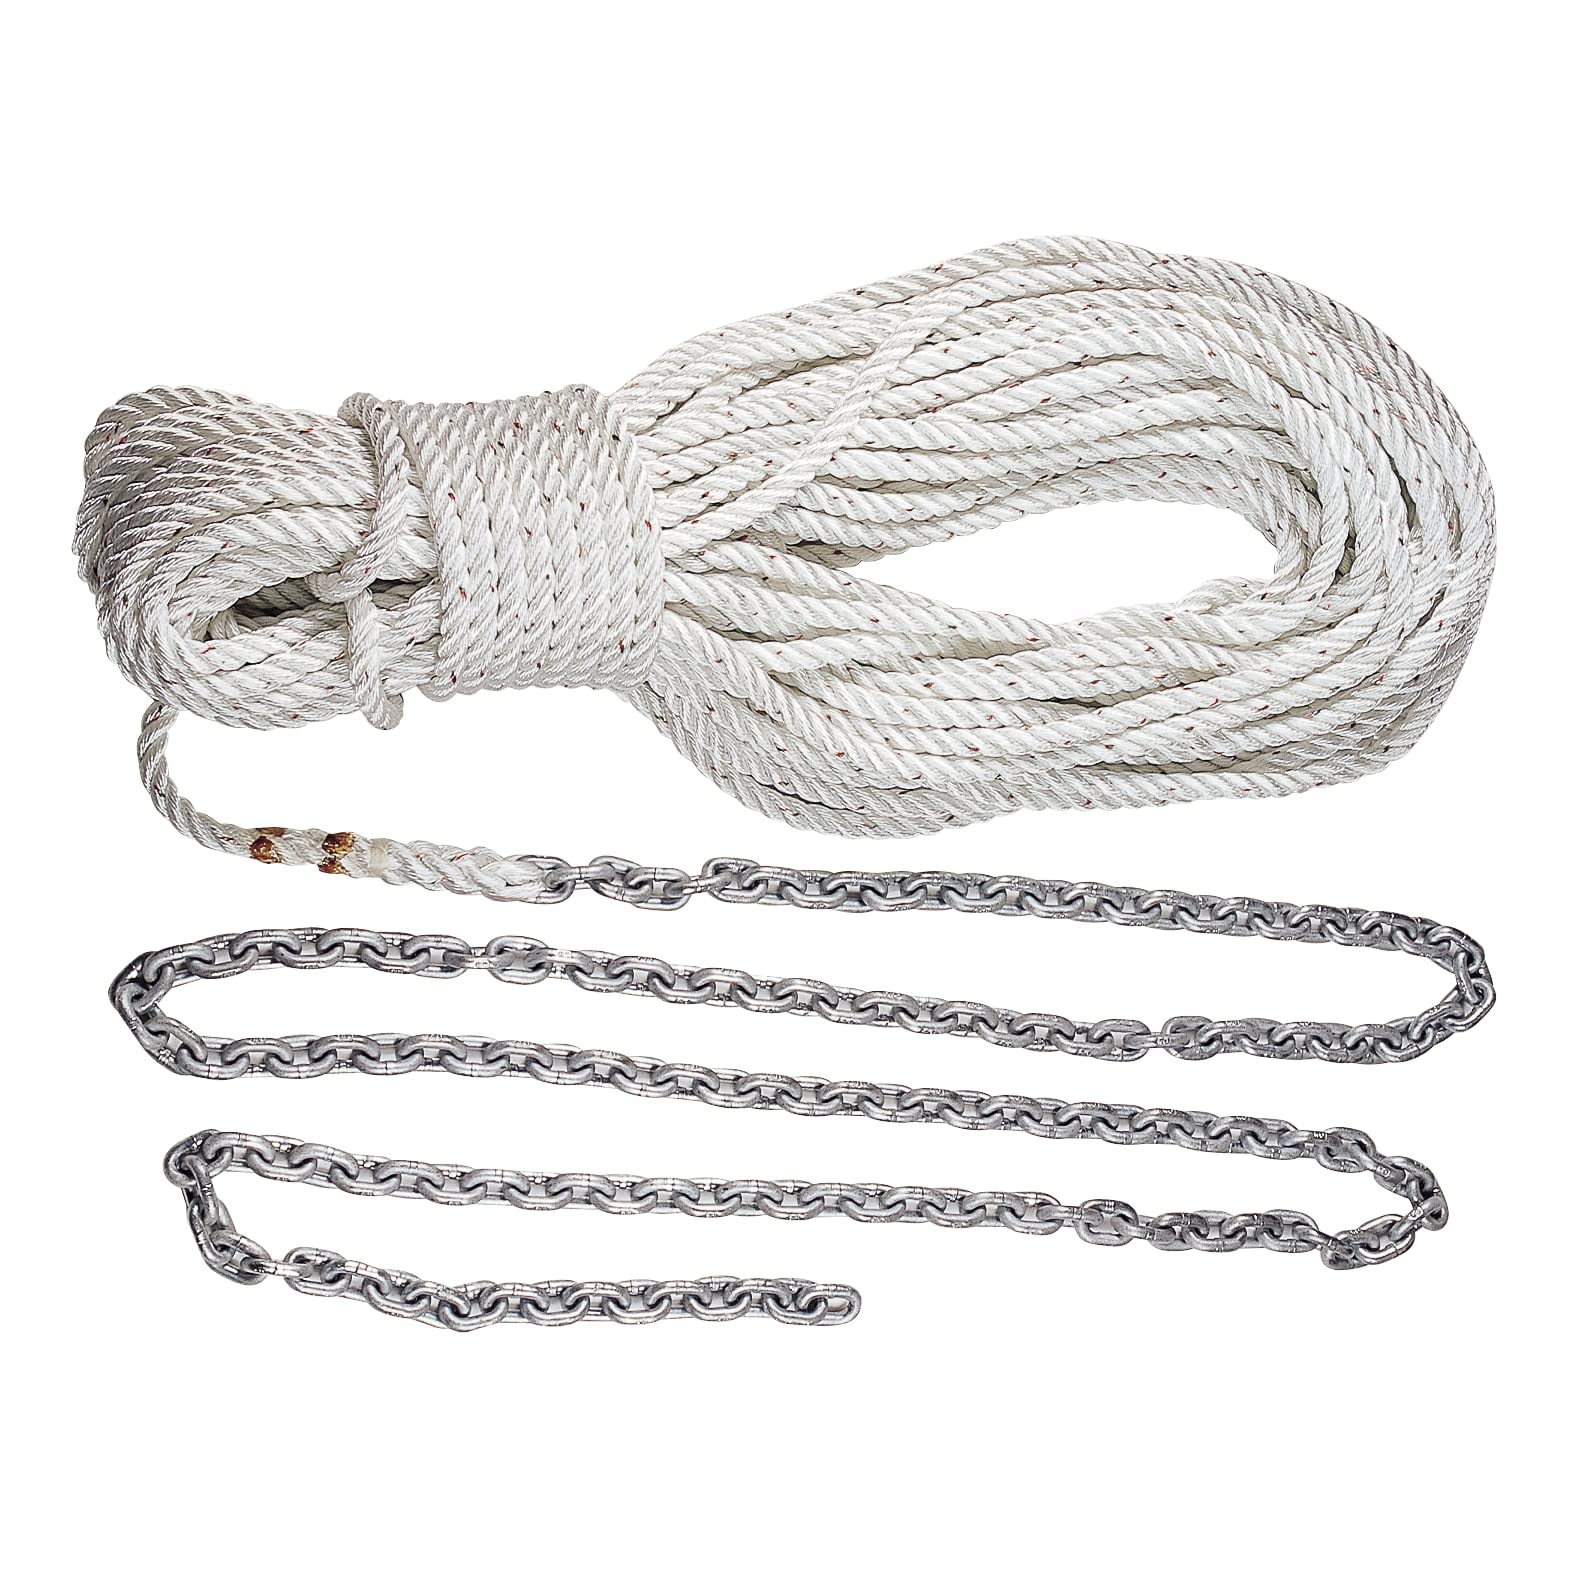 Lewmar Anchor Rode - 5' of 1/4" G4 Chain & 100' of 1/2" Rope w/Shackle